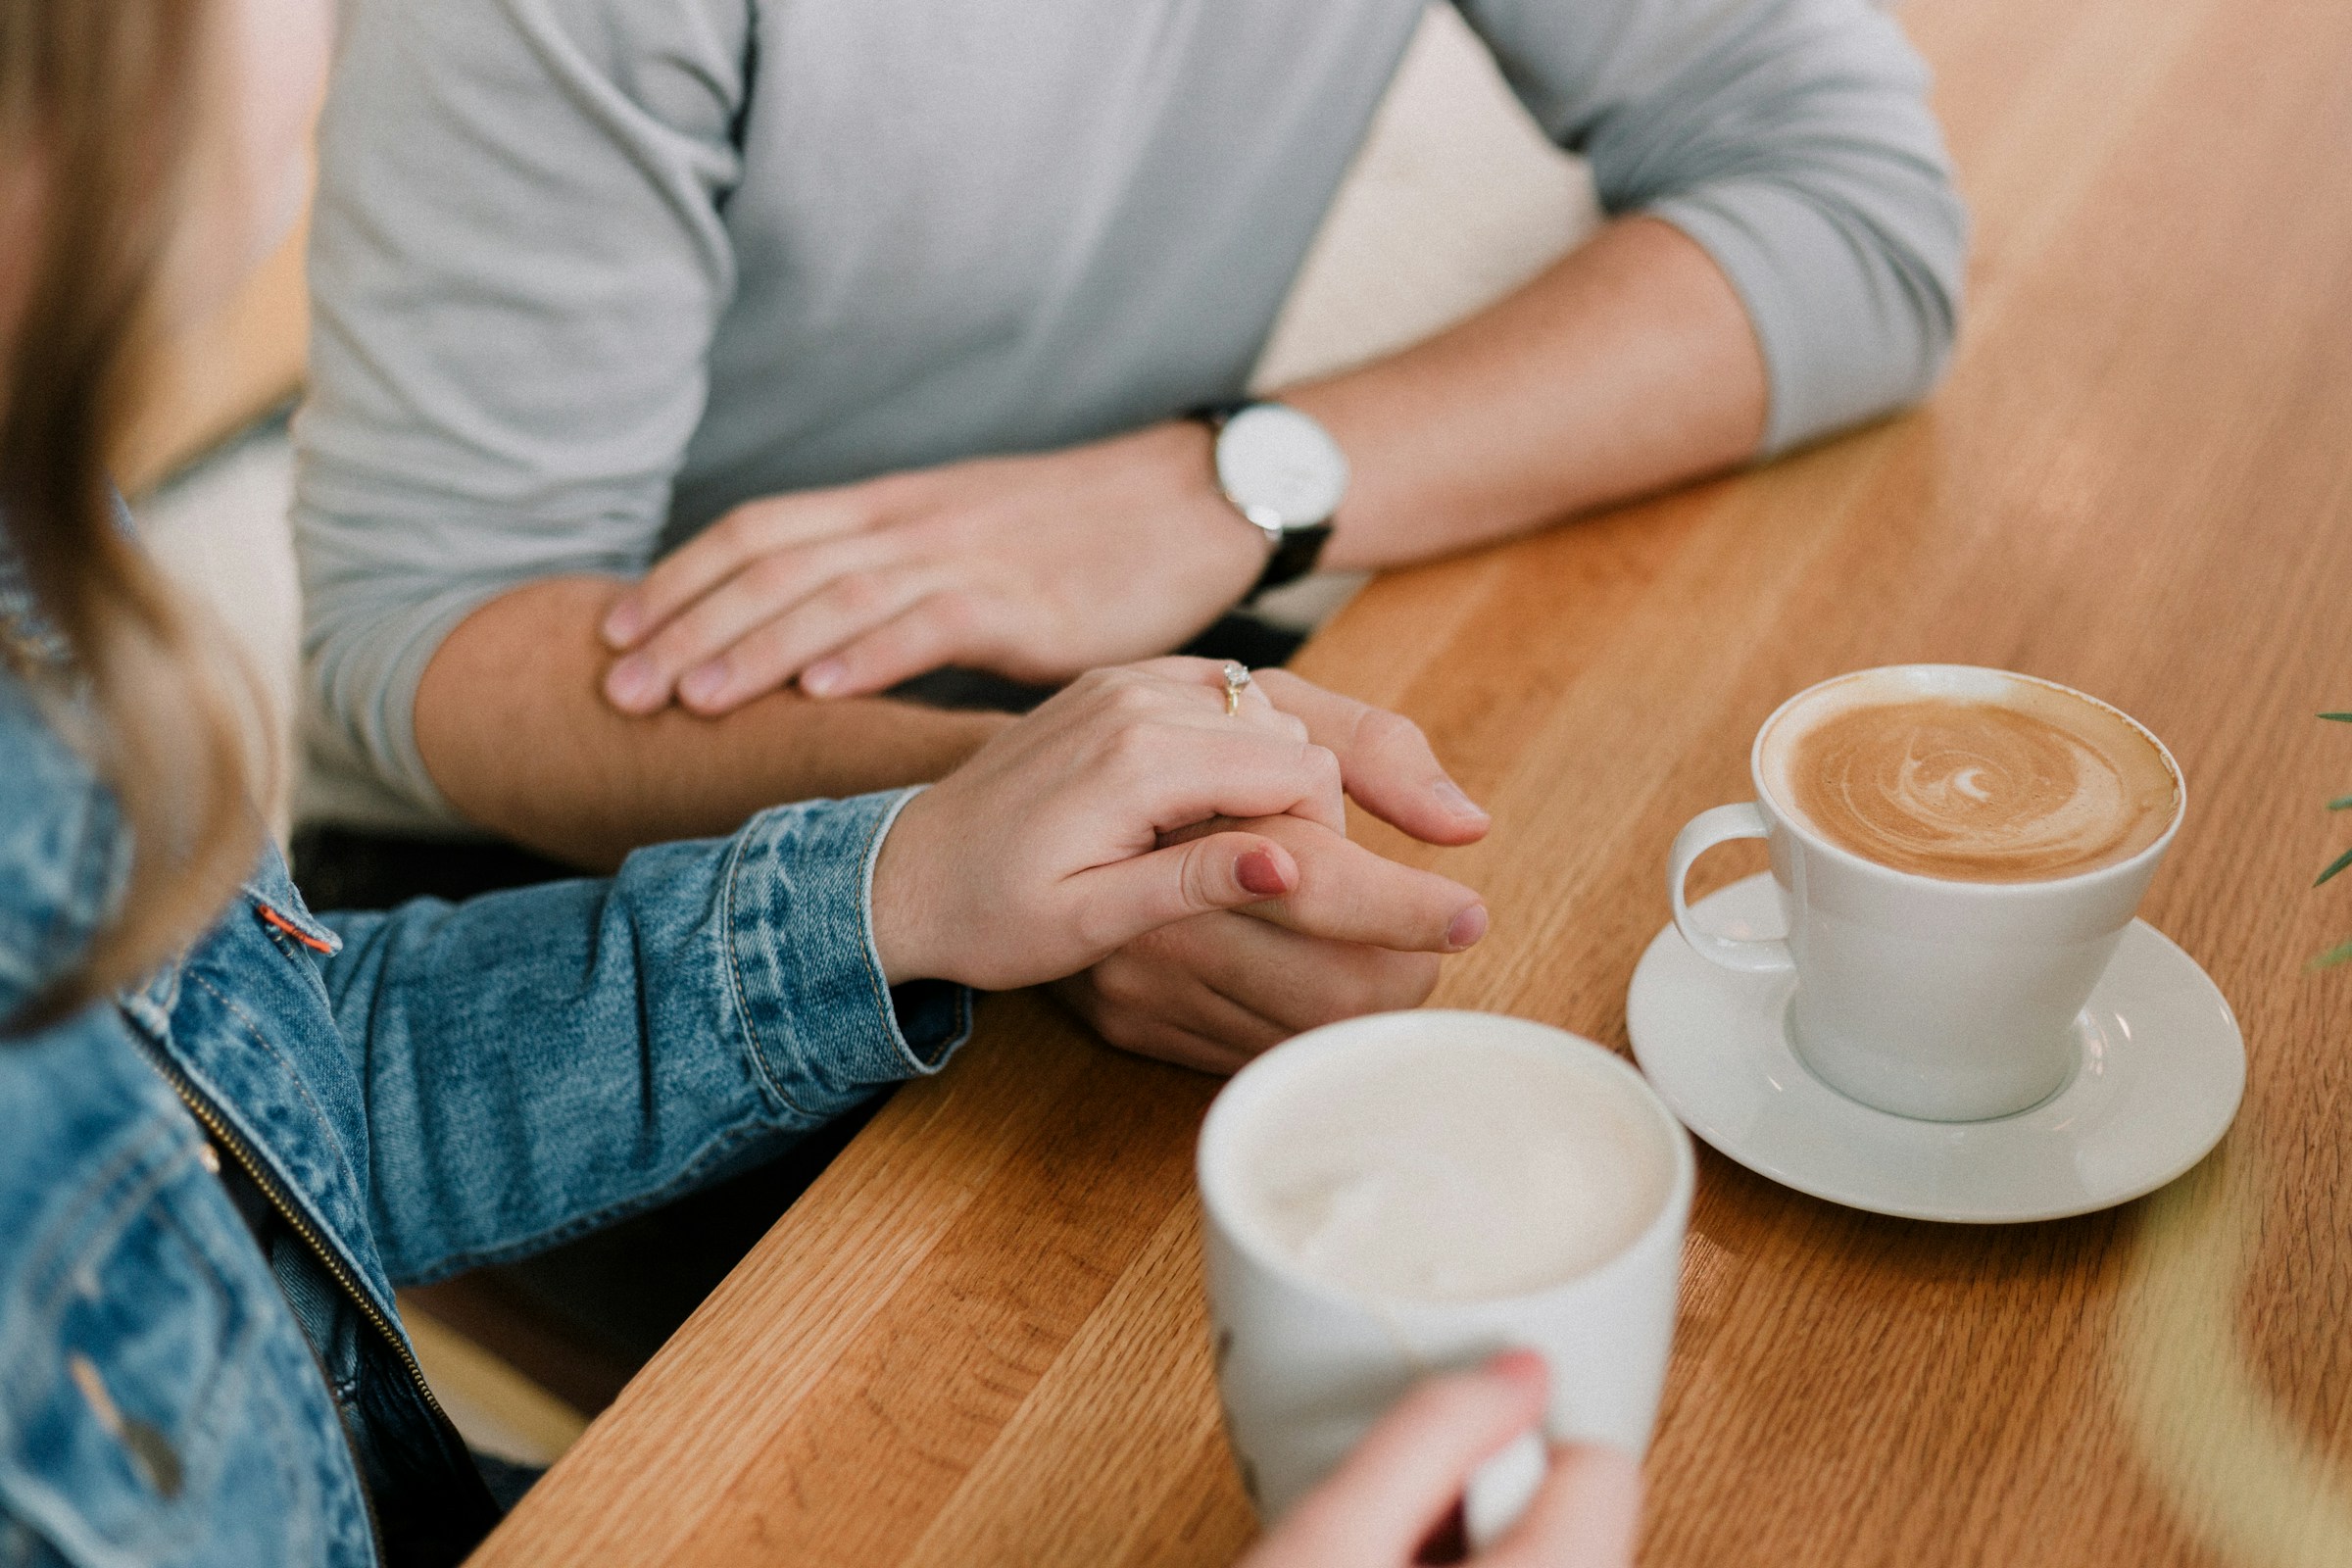 A close-up of a couple talking while having coffee | Source: Unsplash